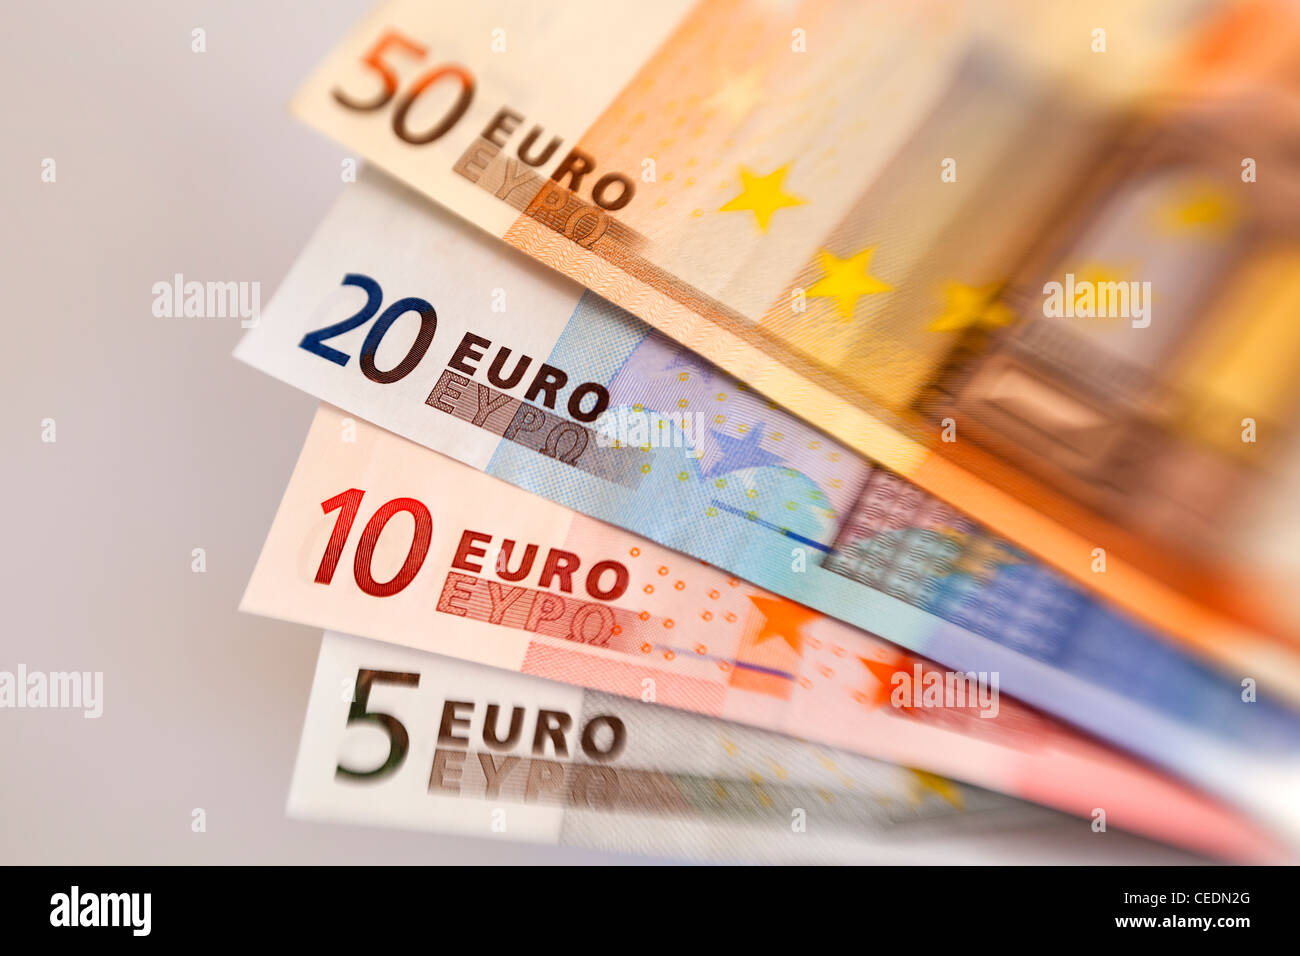 Fan of different size Euro notes currency Stock Photo